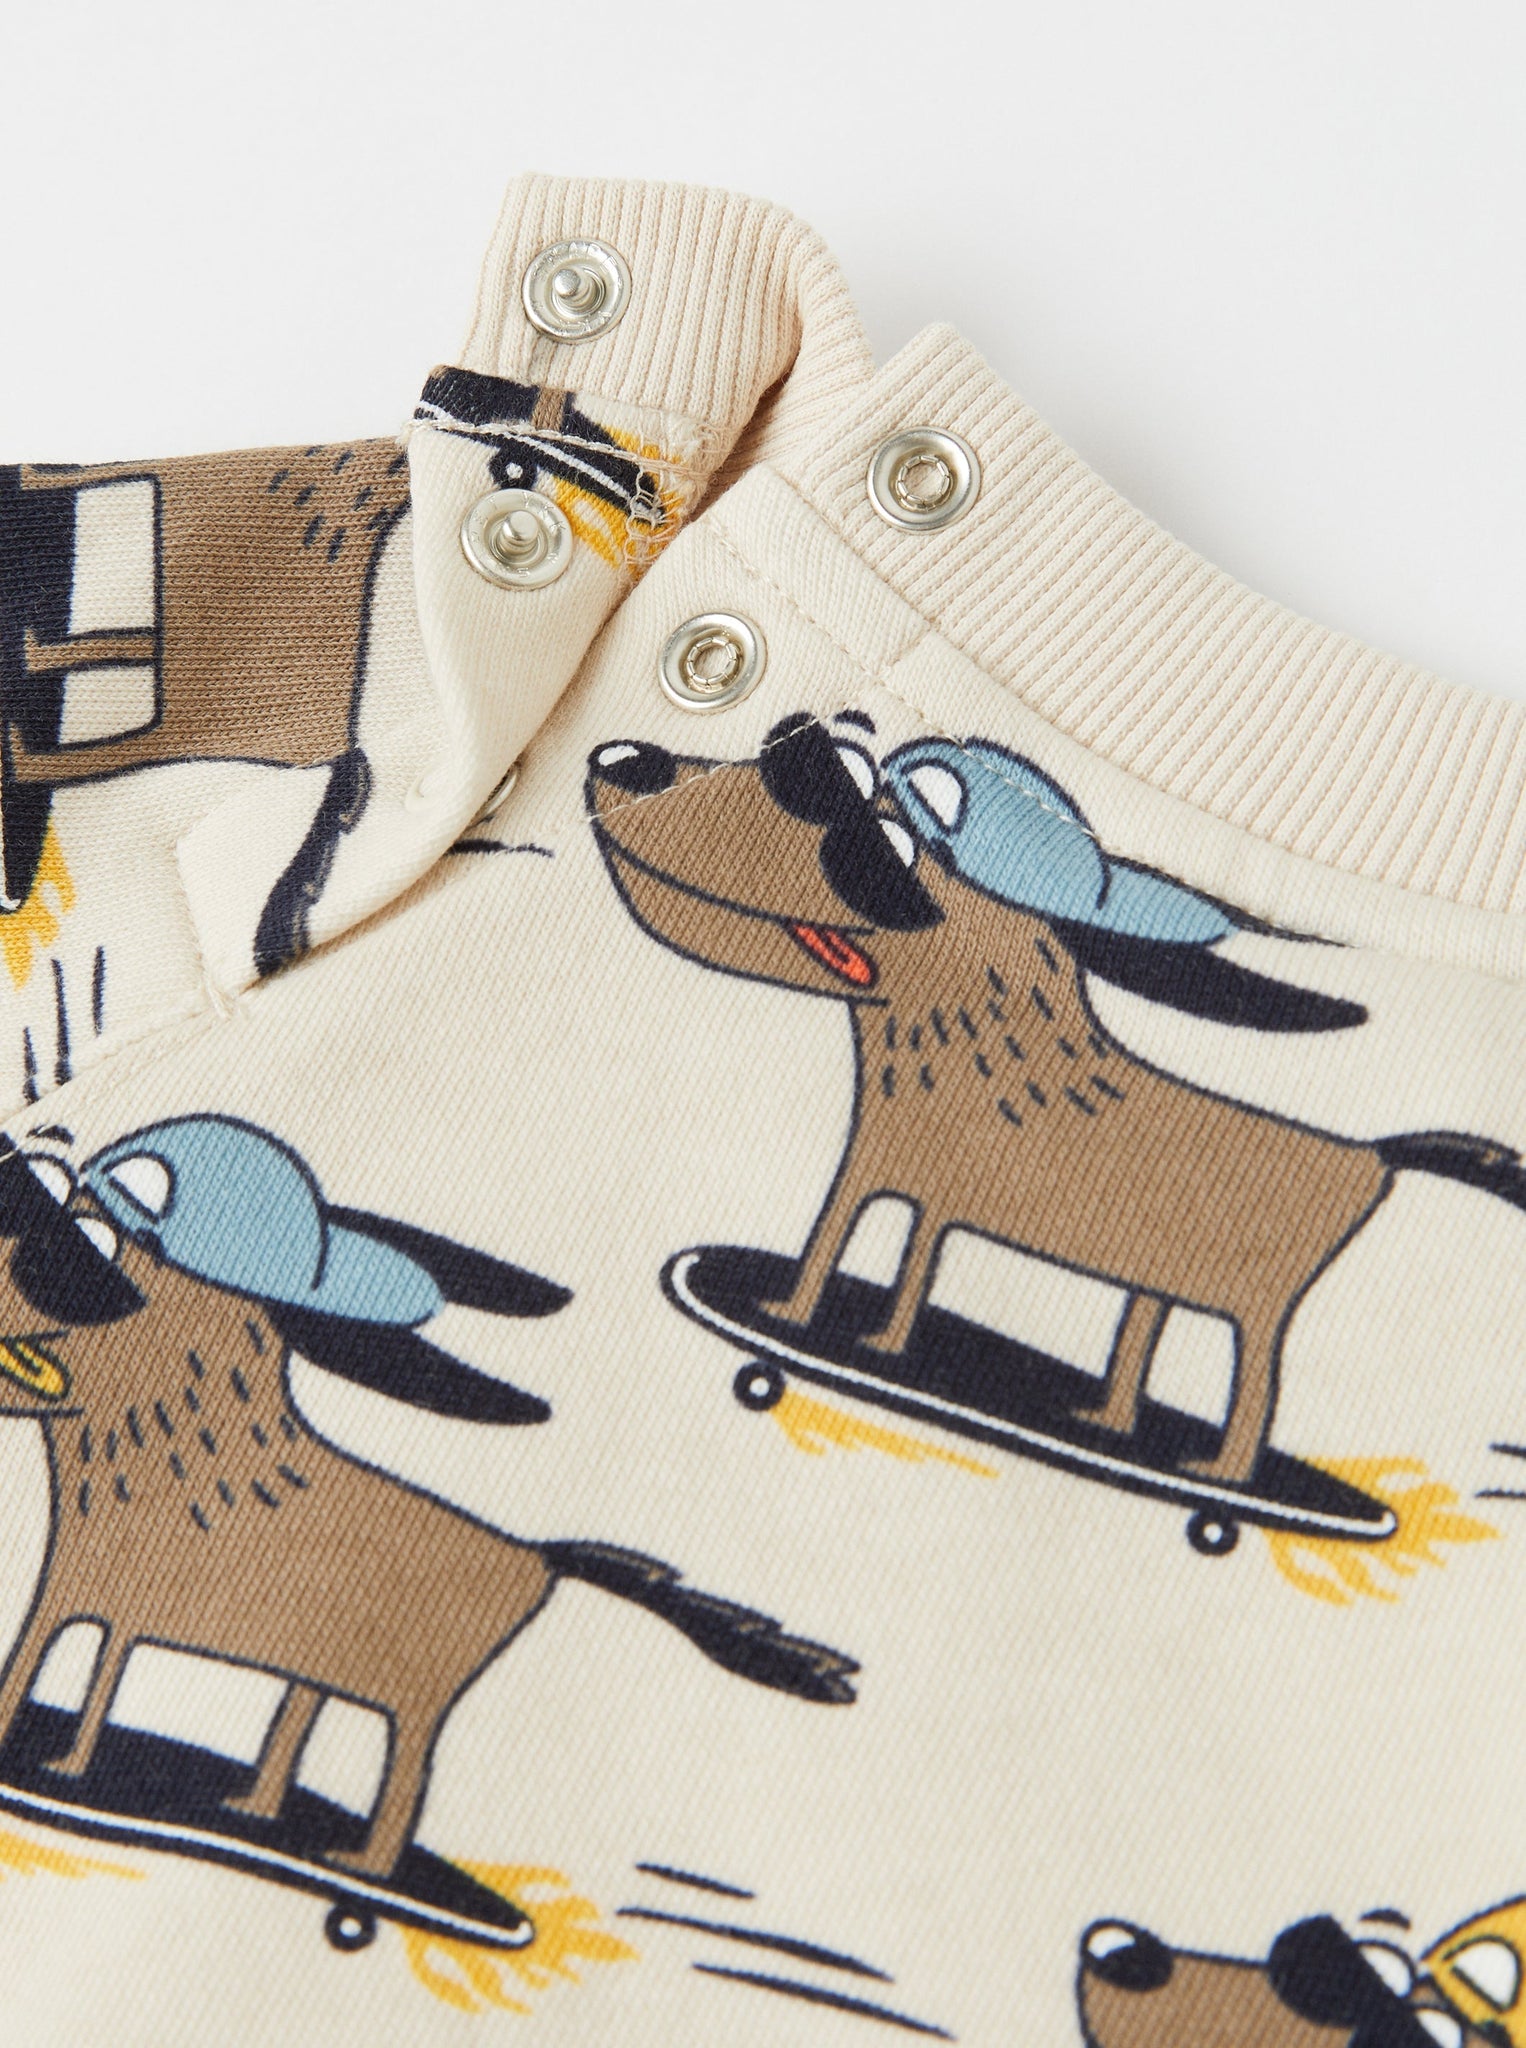 Dog Print Beige Kids Sweatshirt from the Polarn O. Pyret kidswear collection. Clothes made using sustainably sourced materials.